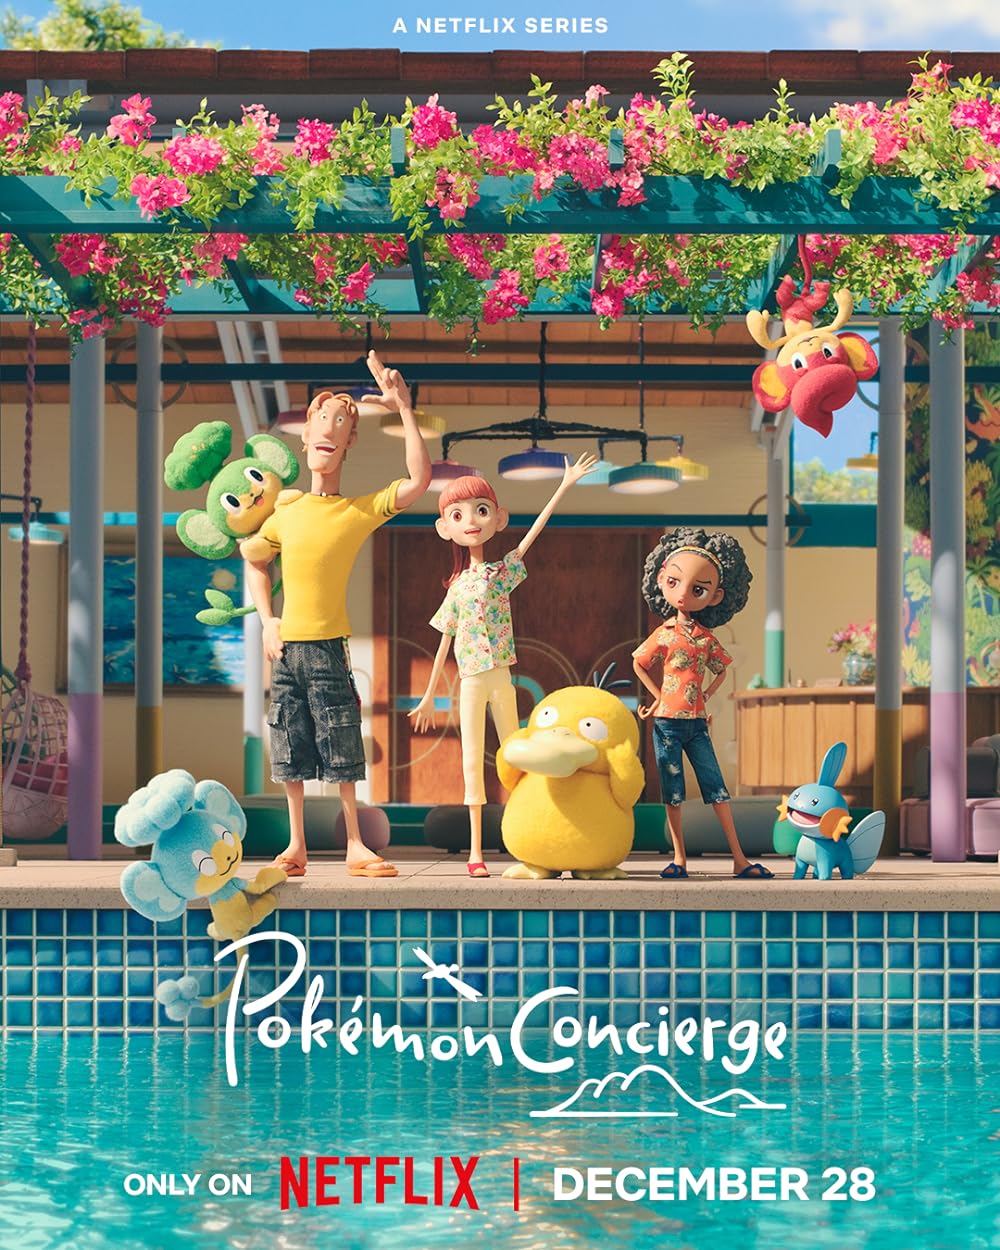 Pokemon Concierge (December 28) - Streaming on NetflixPokemon Concierge explores Haru's adventures as a new concierge at a serene Pokémon Resort, offering a unique perspective on adventures, friendships, and self-discovery in the Pokémon universe.